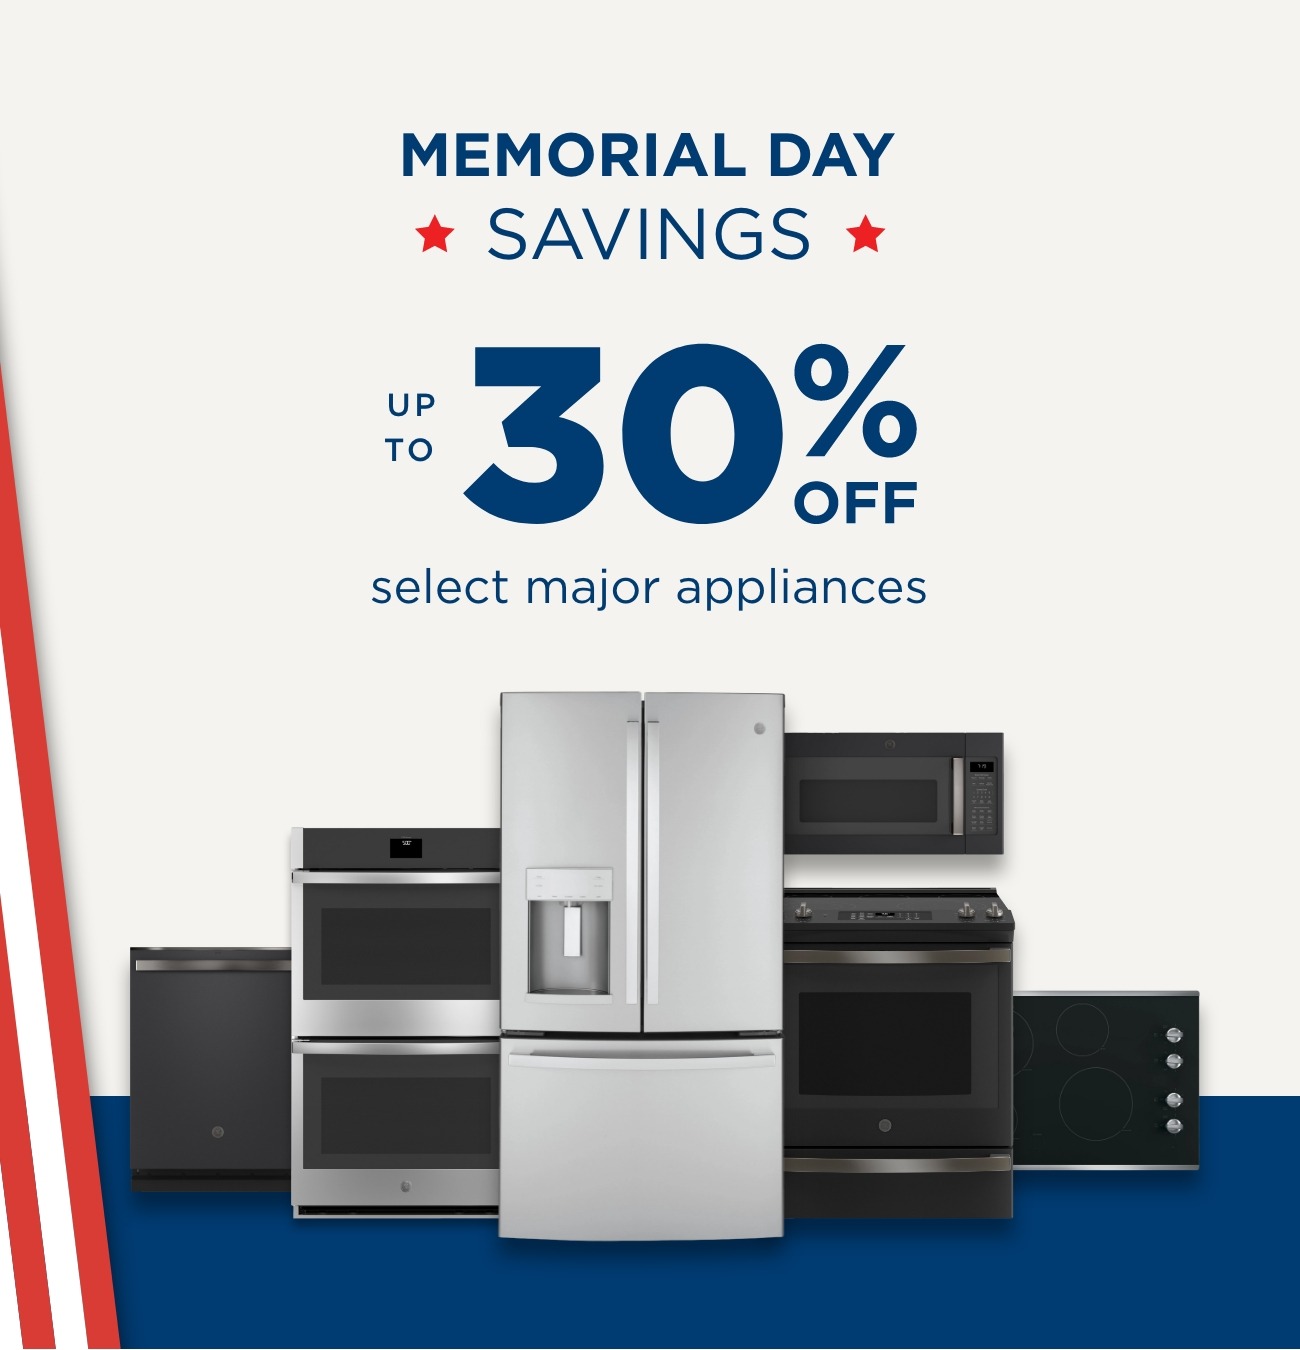 Memorial Day Savings - up to 30% OFF select major appliances